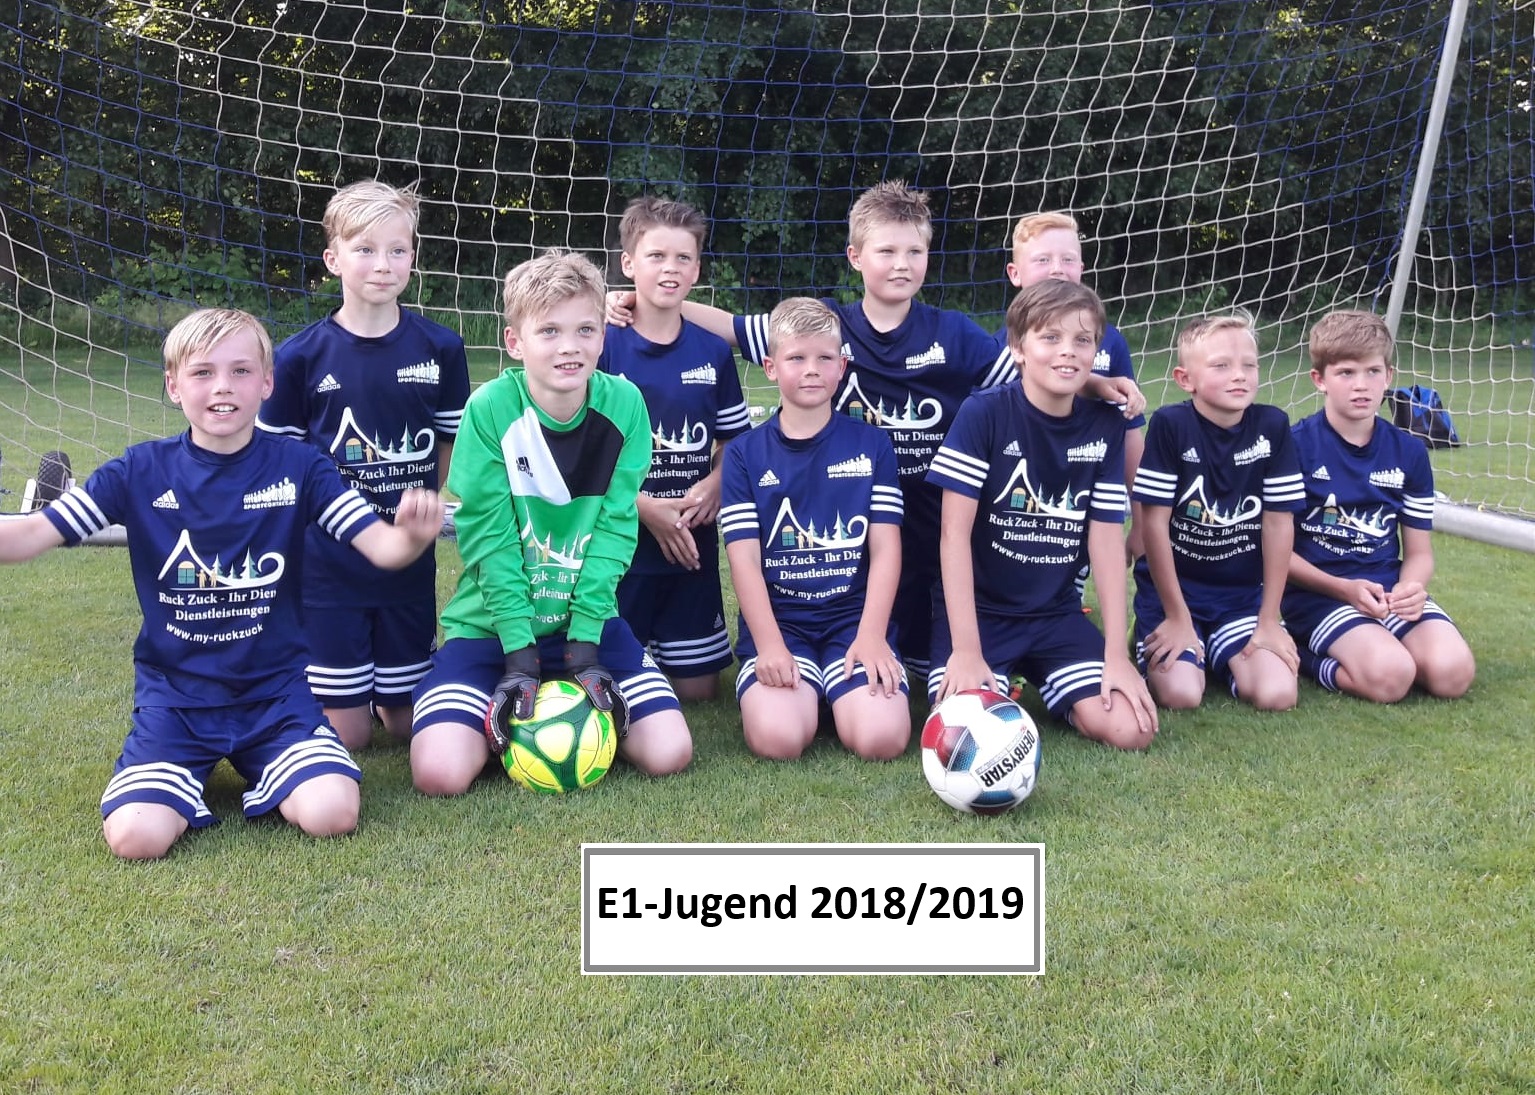 Unsere E1-Jugend 2018/2019